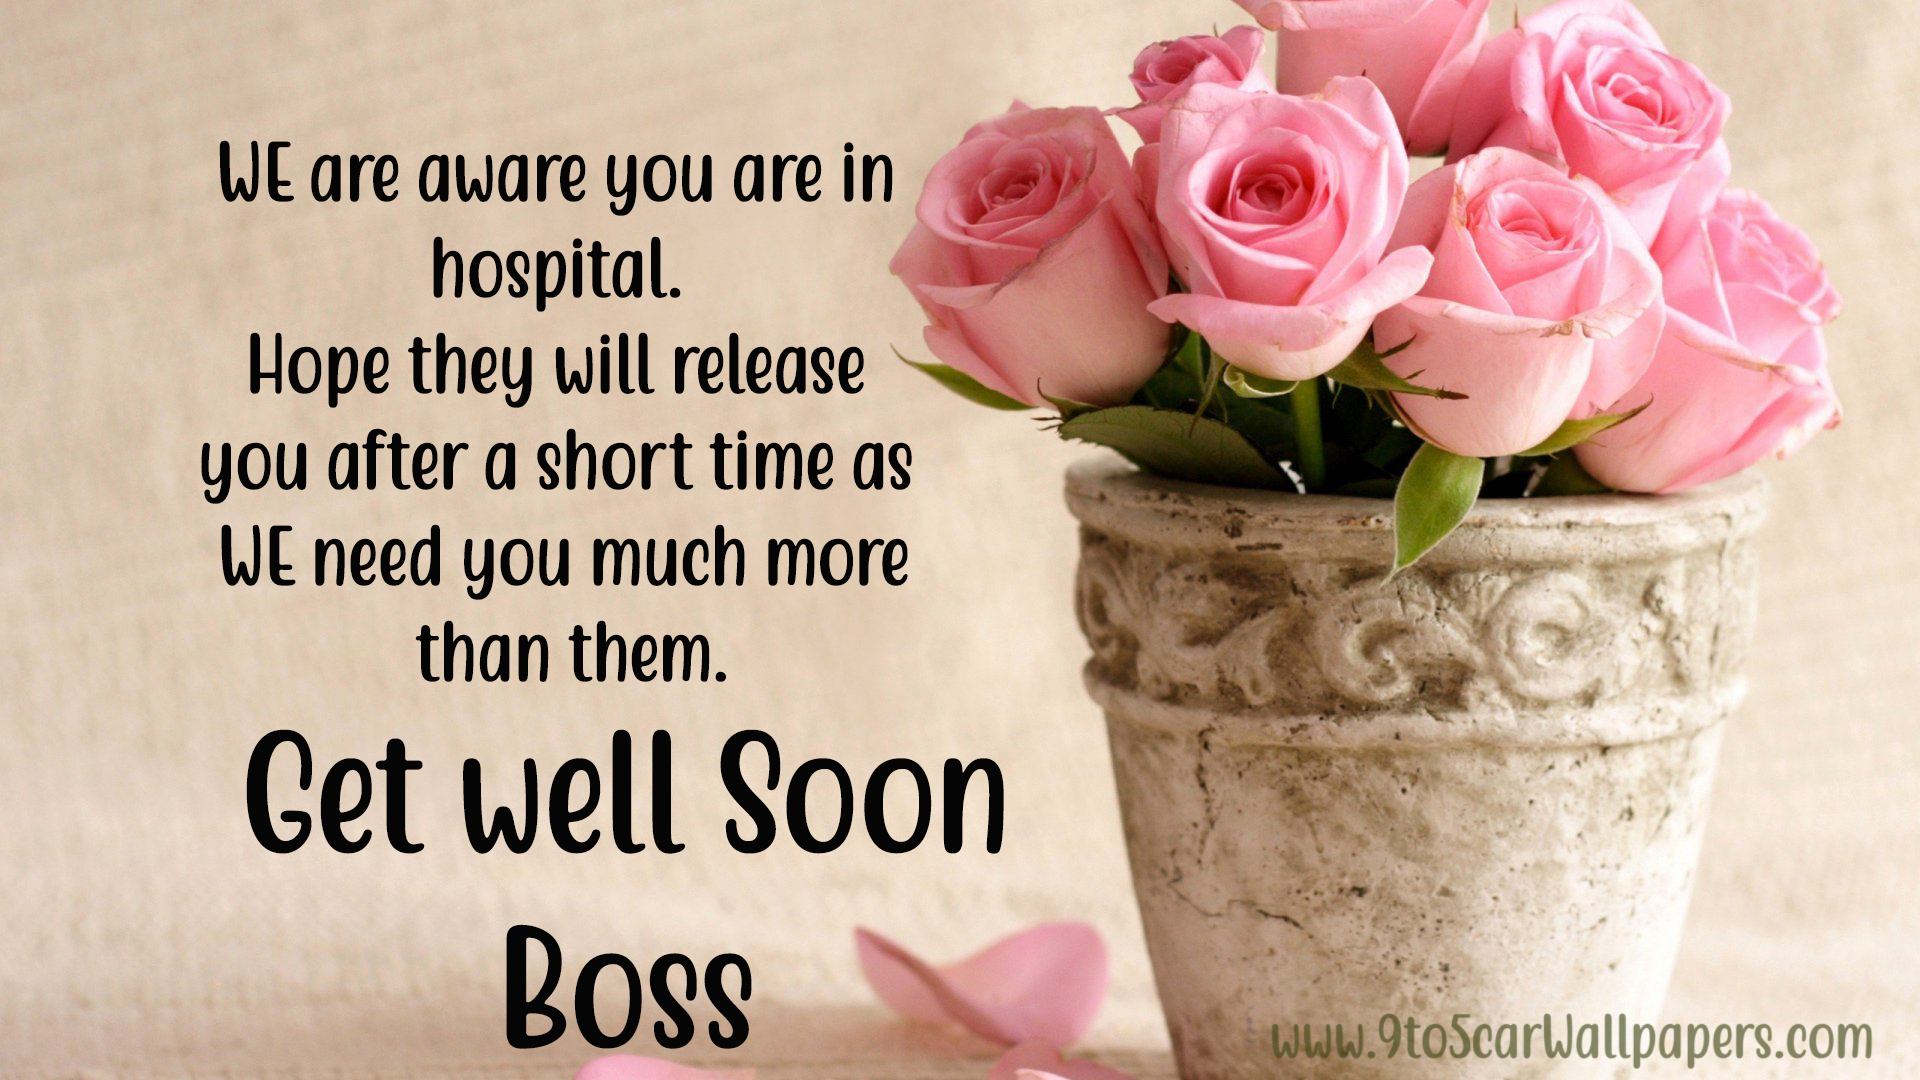 Get Well Wishes For Boss After Surgery My Site Downloads